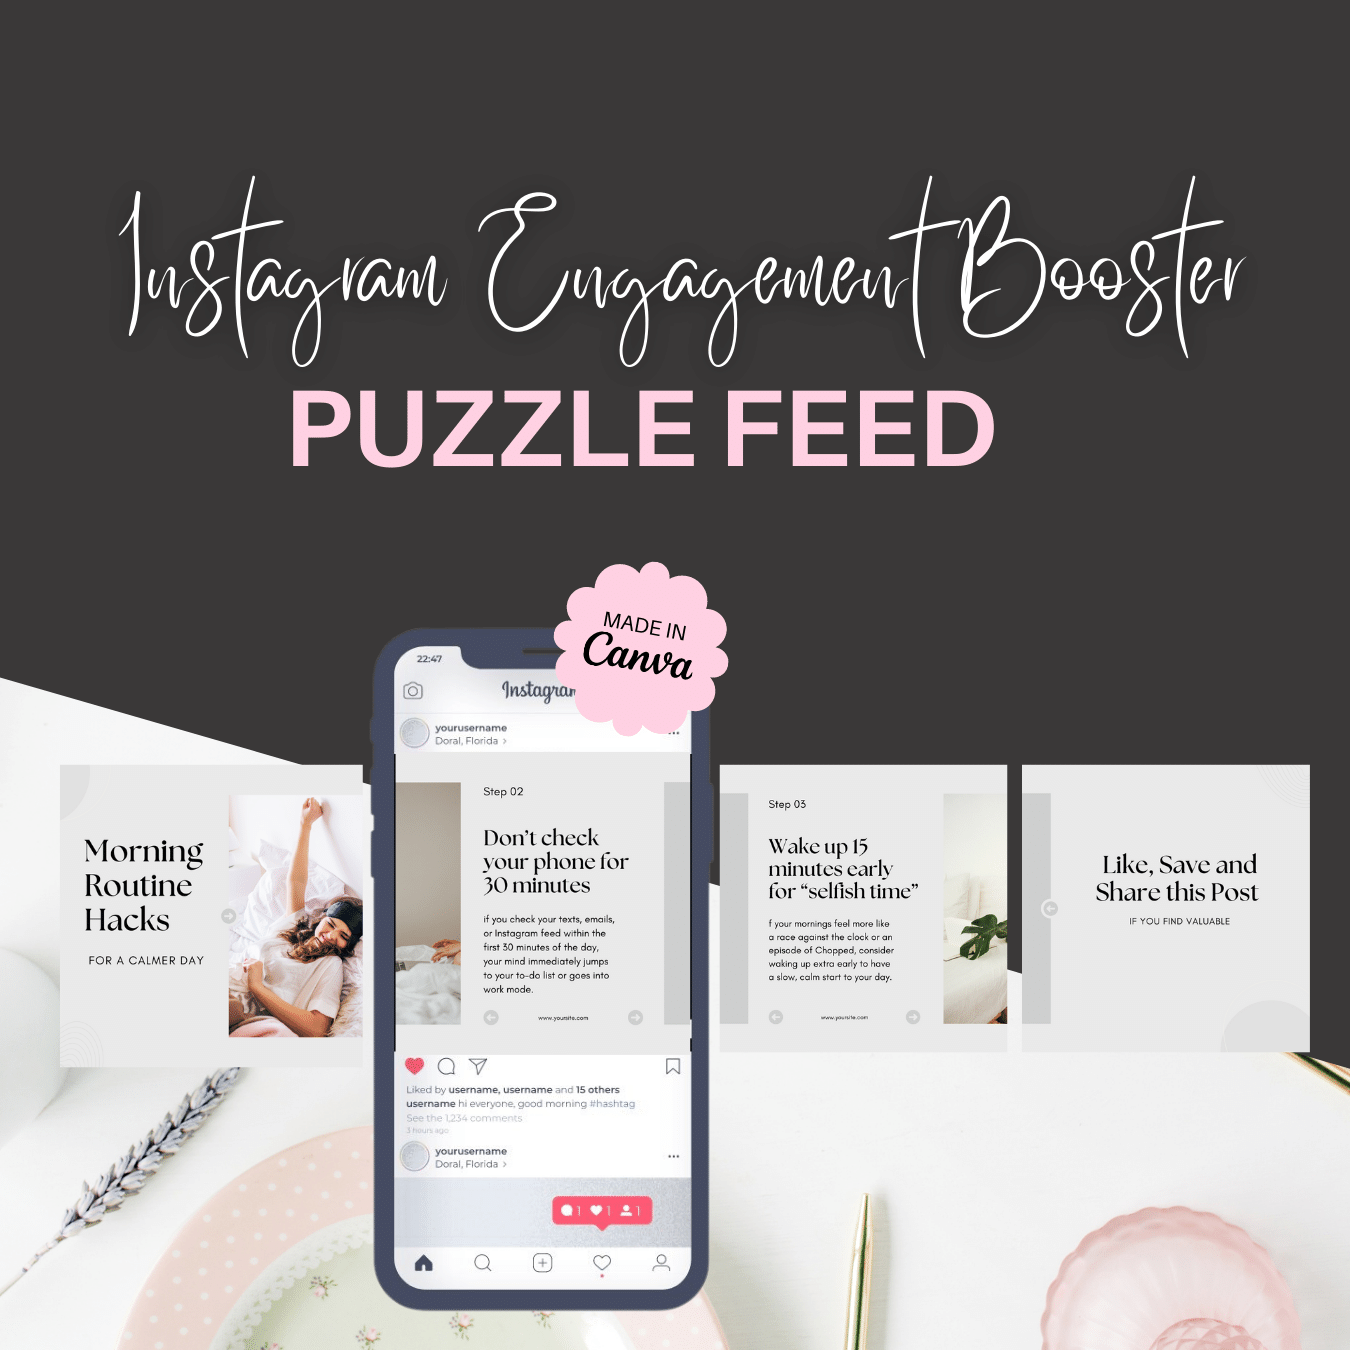 100 instagram Engagement Booster Puzzle Feed
